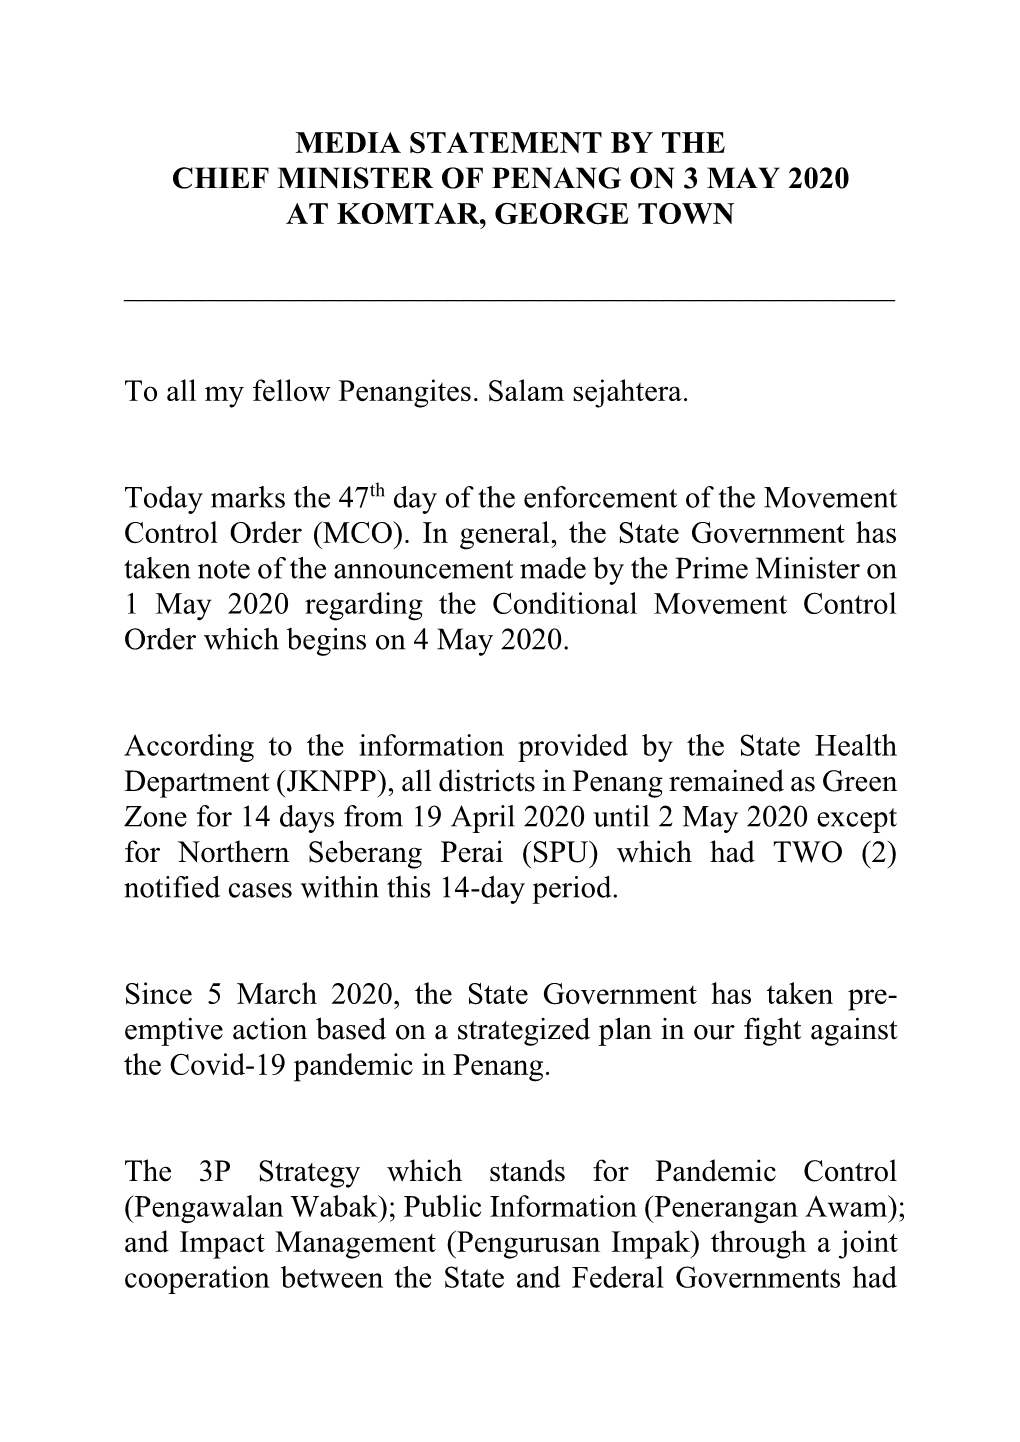 Media Statement by the Chief Minister of Penang on 3 May 2020 at Komtar, George Town